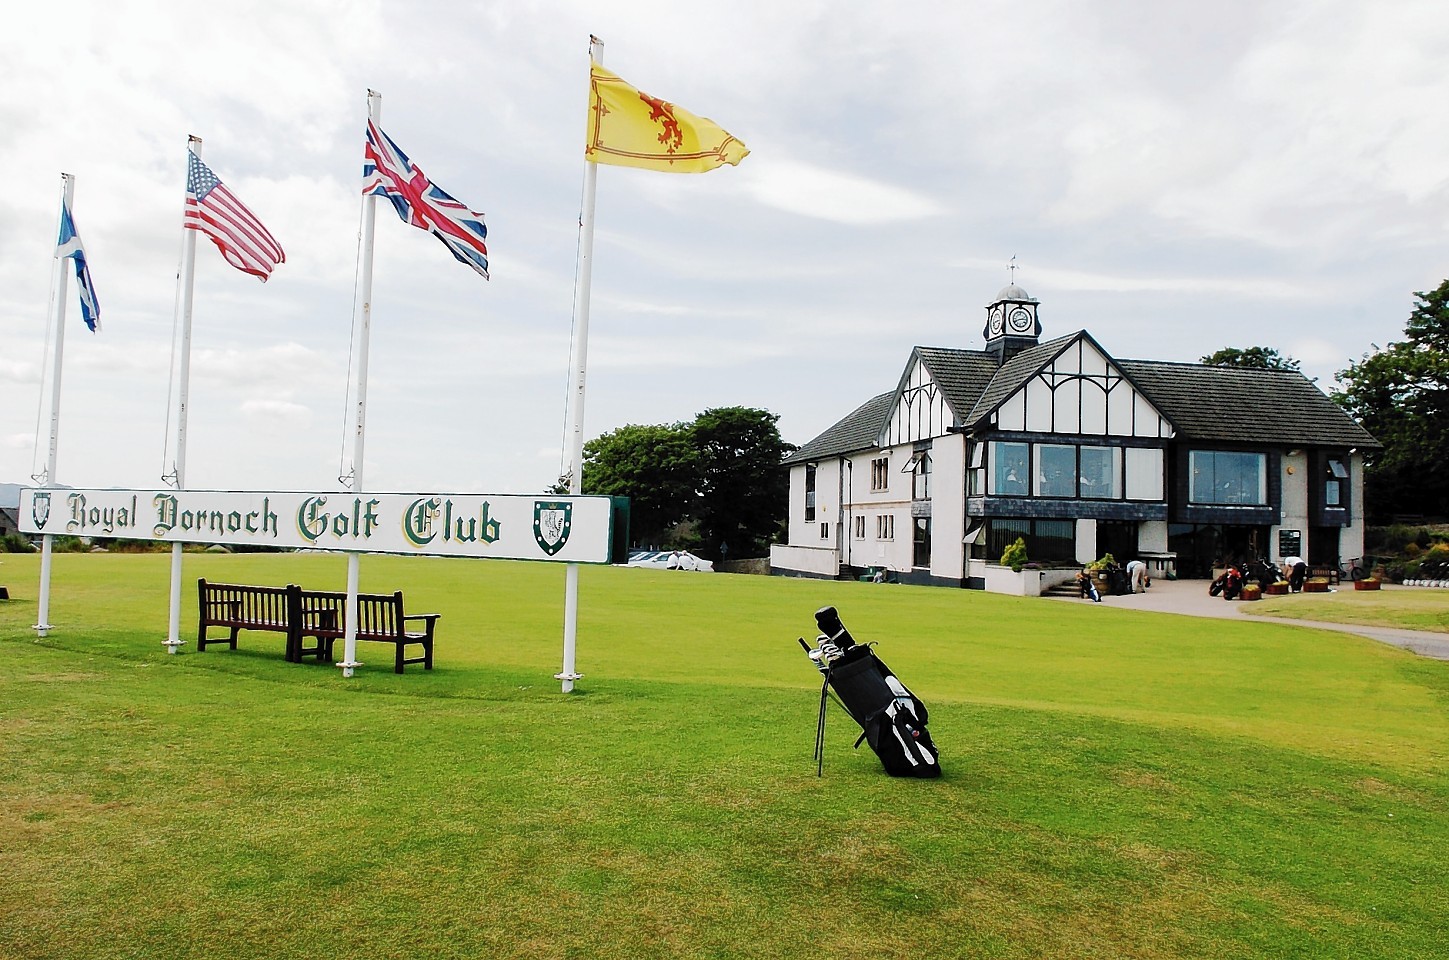 Royal Dornoch Golf Club is just one part of the notorious courses played in the Highland Golf Links Pro Am